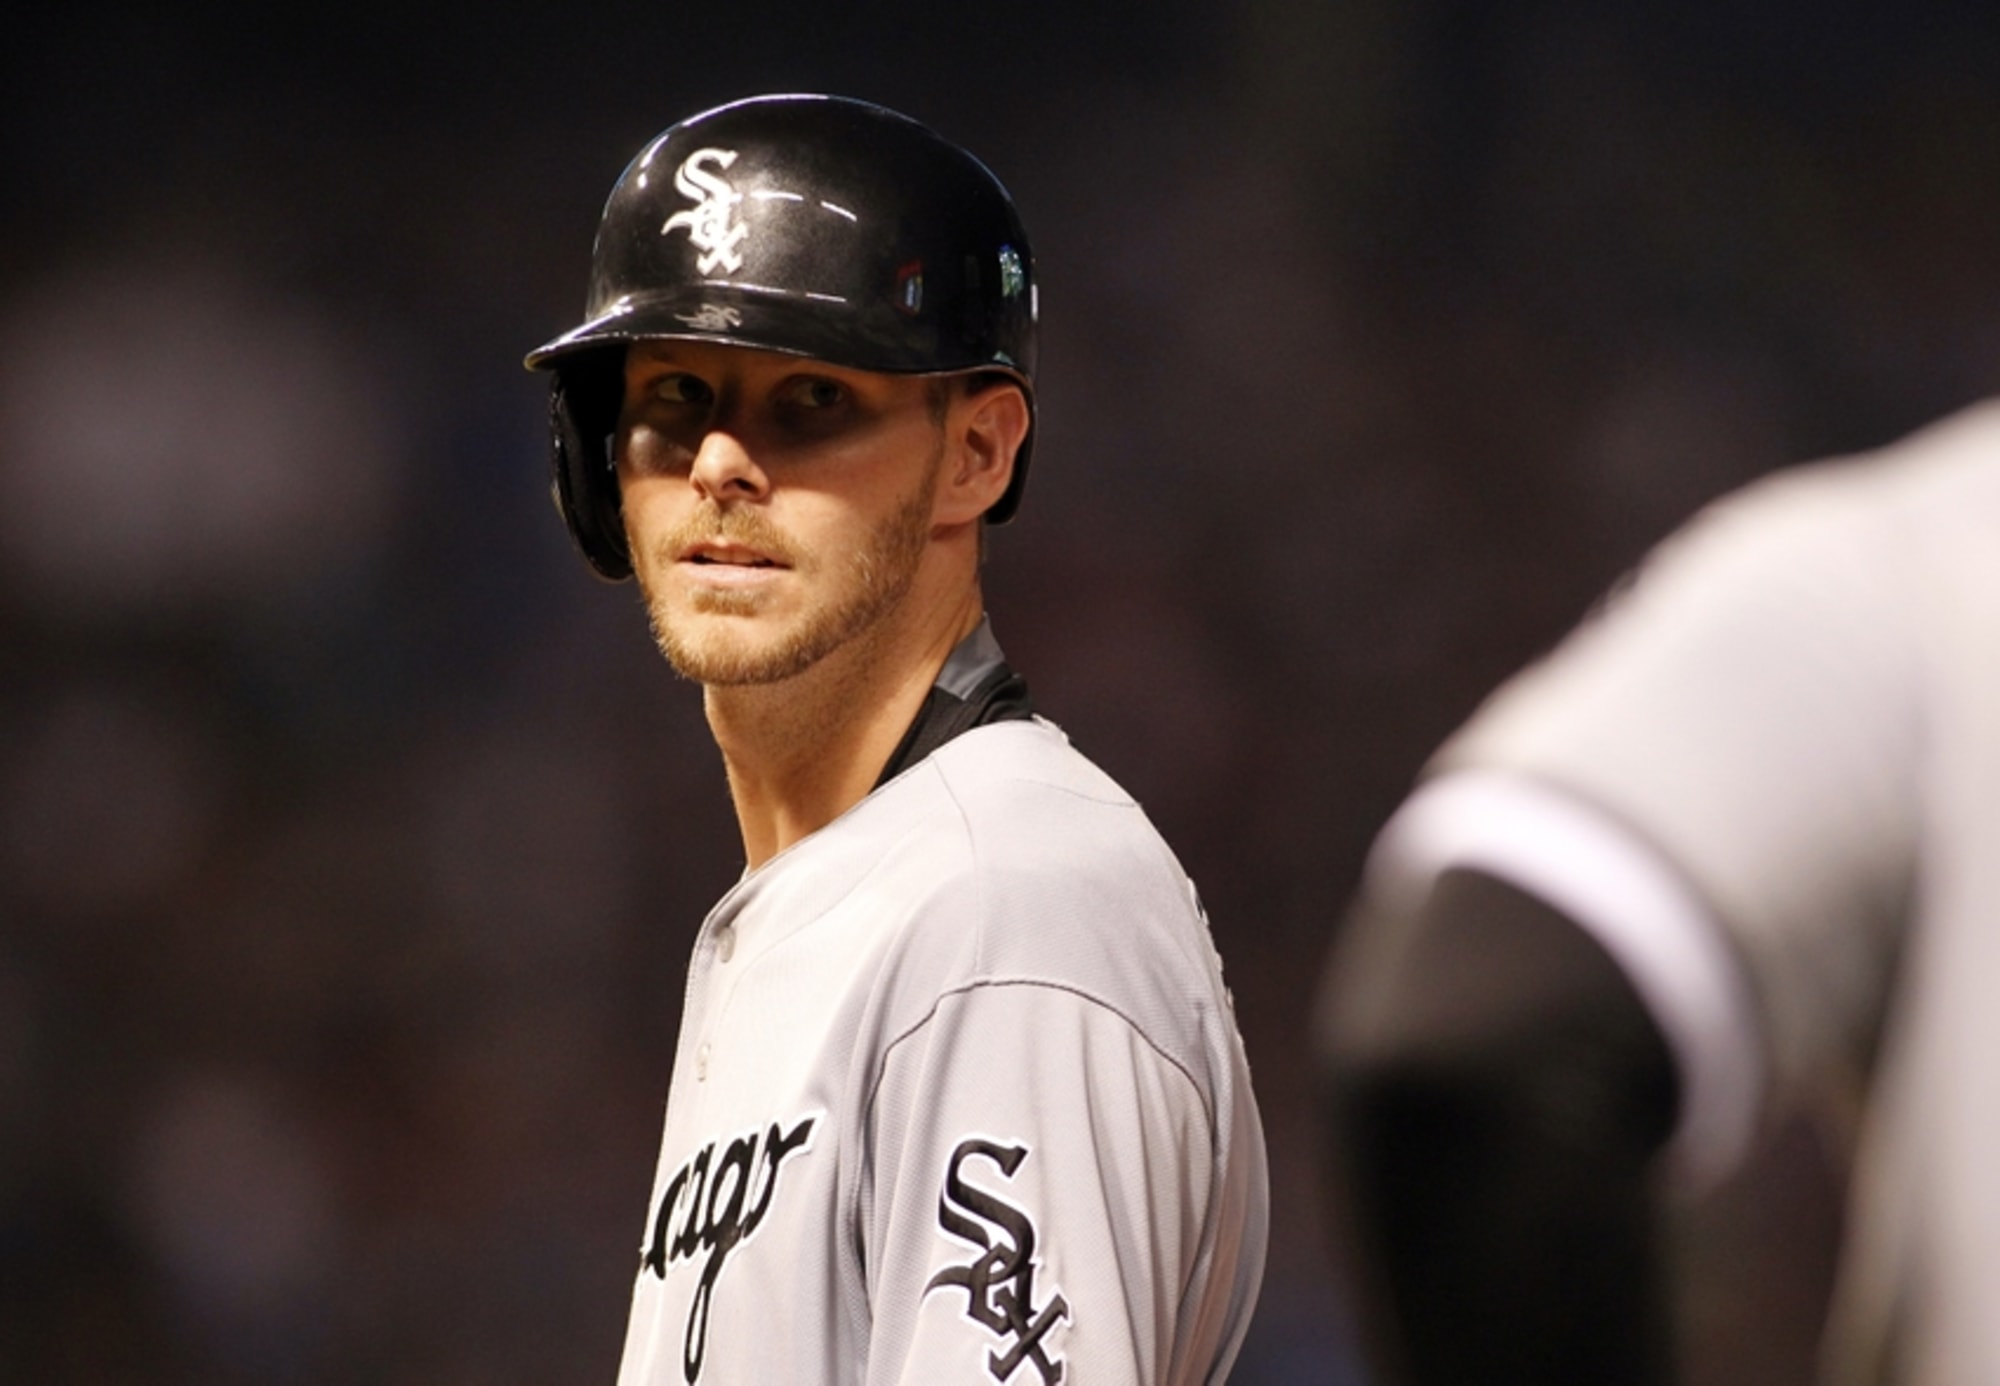 Bob Nightengale of USA Today Says White Sox Players Watched Chris